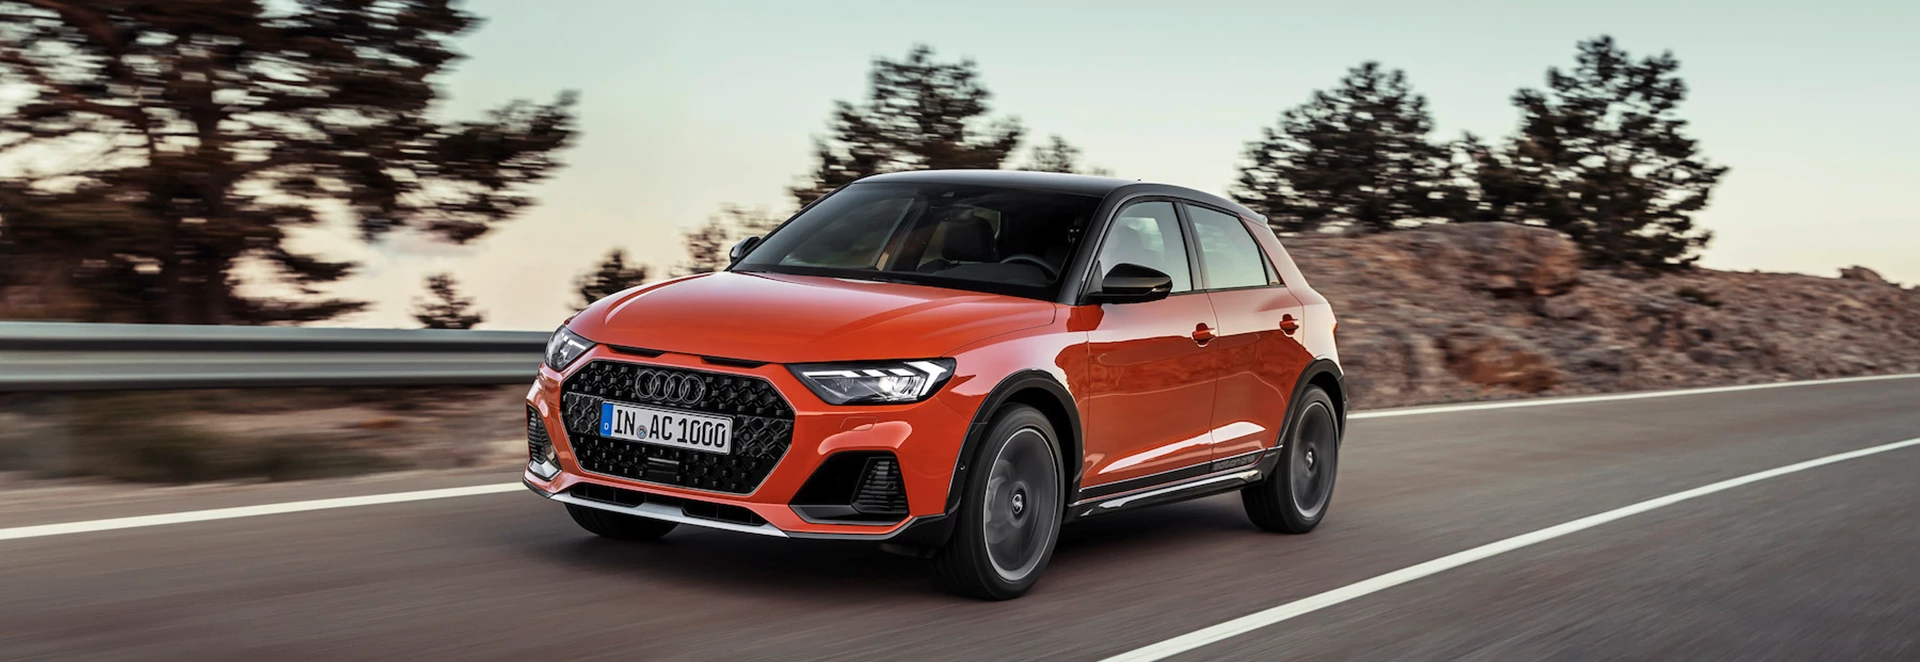 Audi unveils new crossover based on the A1: The A1 Citycarver 